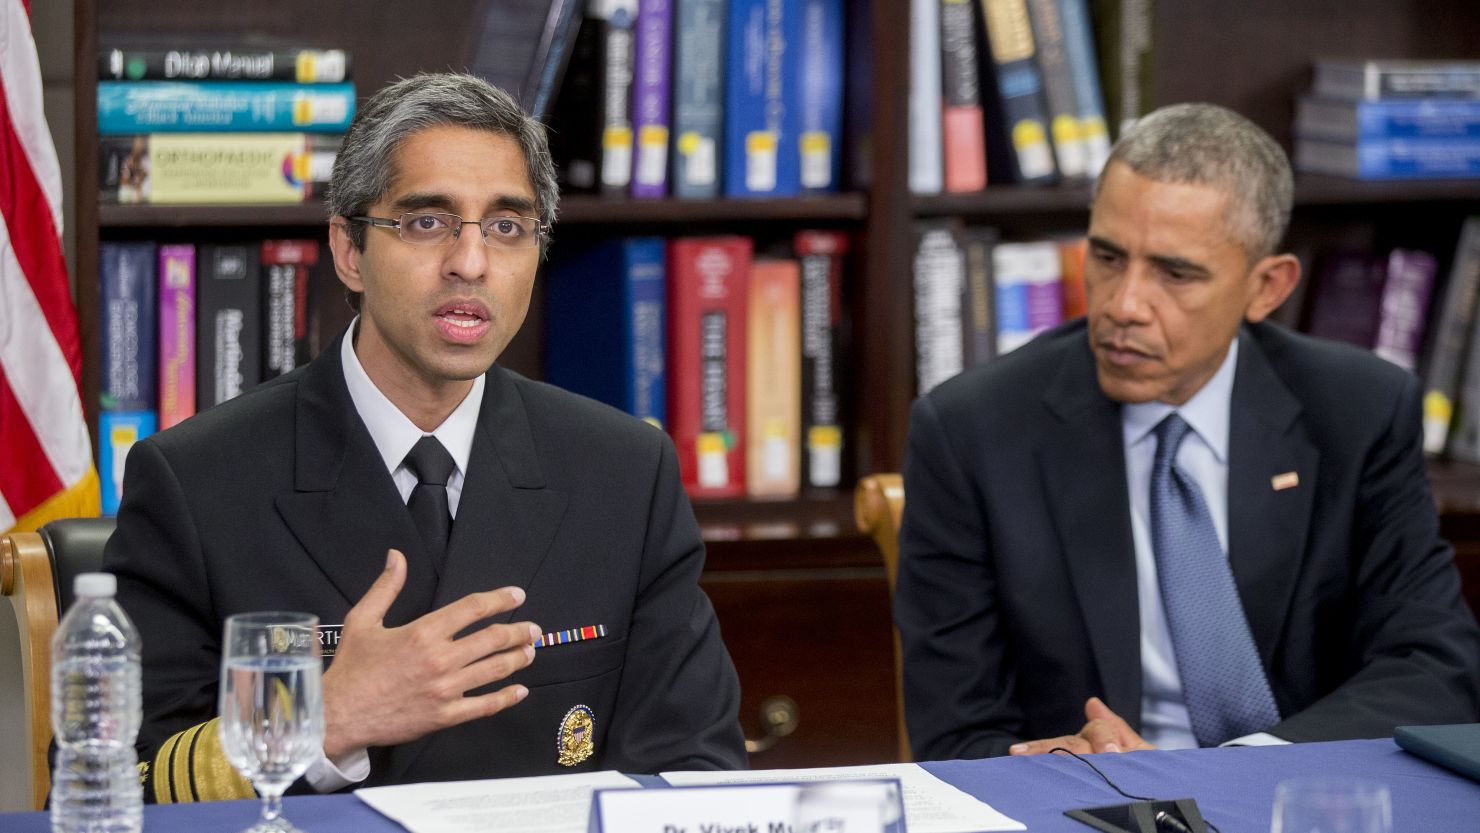 Vivek Murthy, then-US Surgeon General, speaks while participating in a roundtable discussion on the impacts of climate change on public health at Howard University with President Barack Obama in Washington, DC, on April 7, 2015.